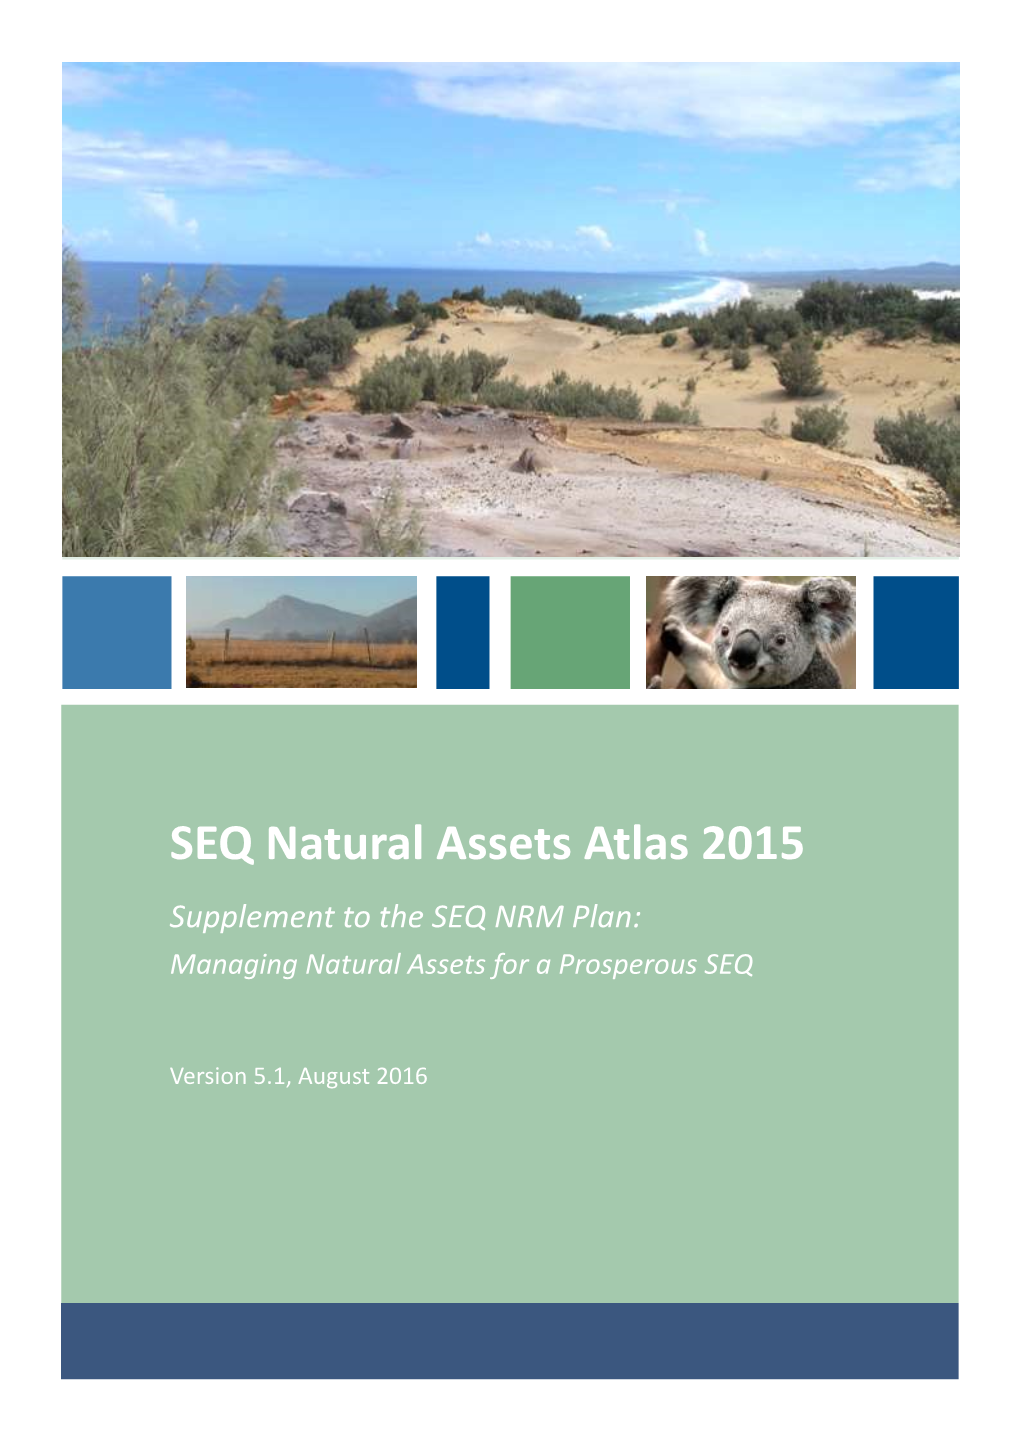 SEQ Natural Assets Atlas 2015 Supplement to the SEQ NRM Plan: Managing Natural Assets for a Prosperous SEQ